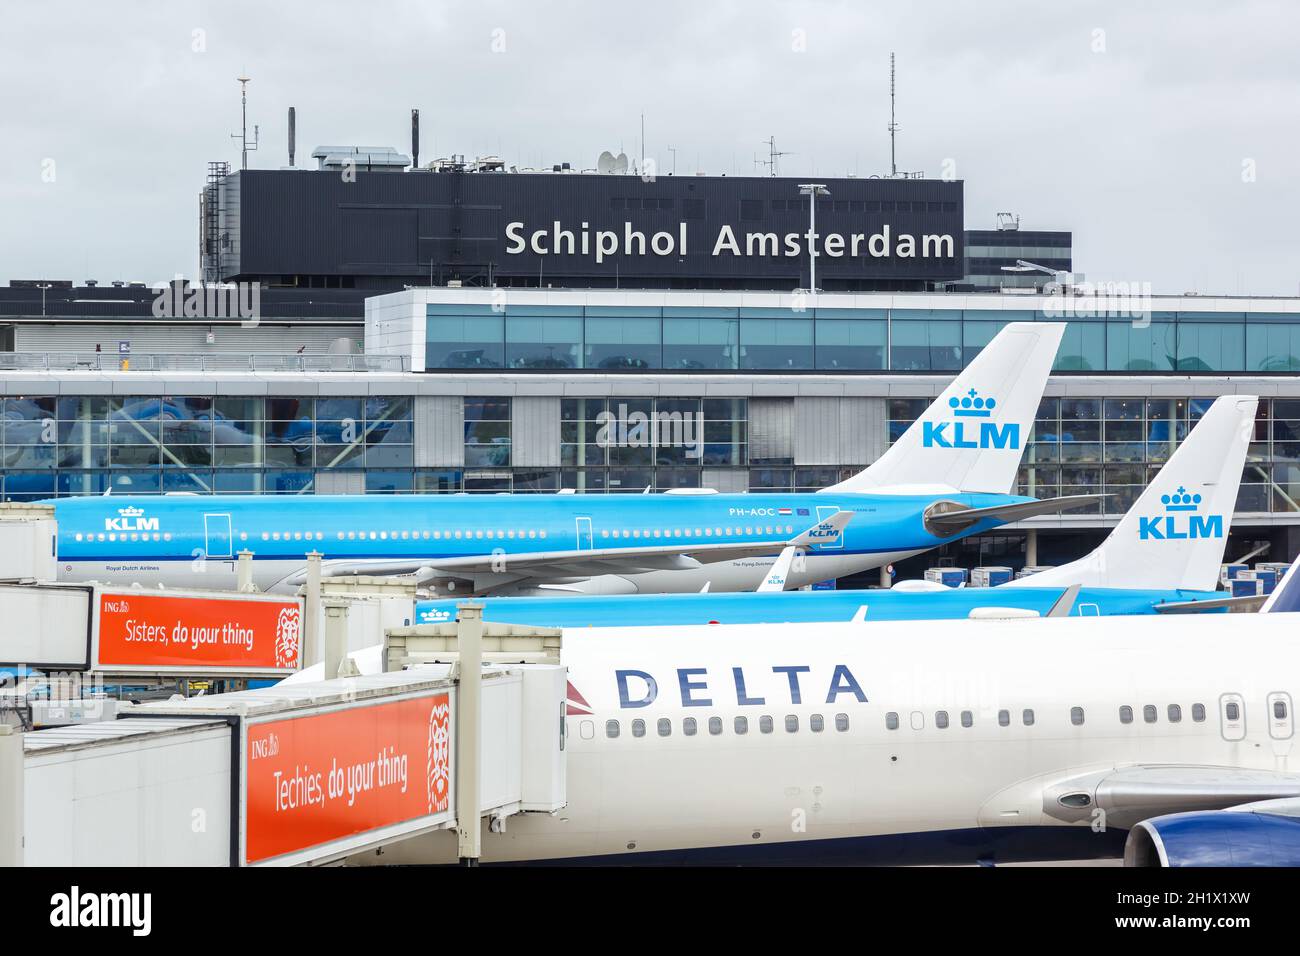 Amsterdam, Netherlands - May 21, 2021: Airplanes at Amsterdam Schiphol airport (AMS) in the Netherlands. Stock Photo